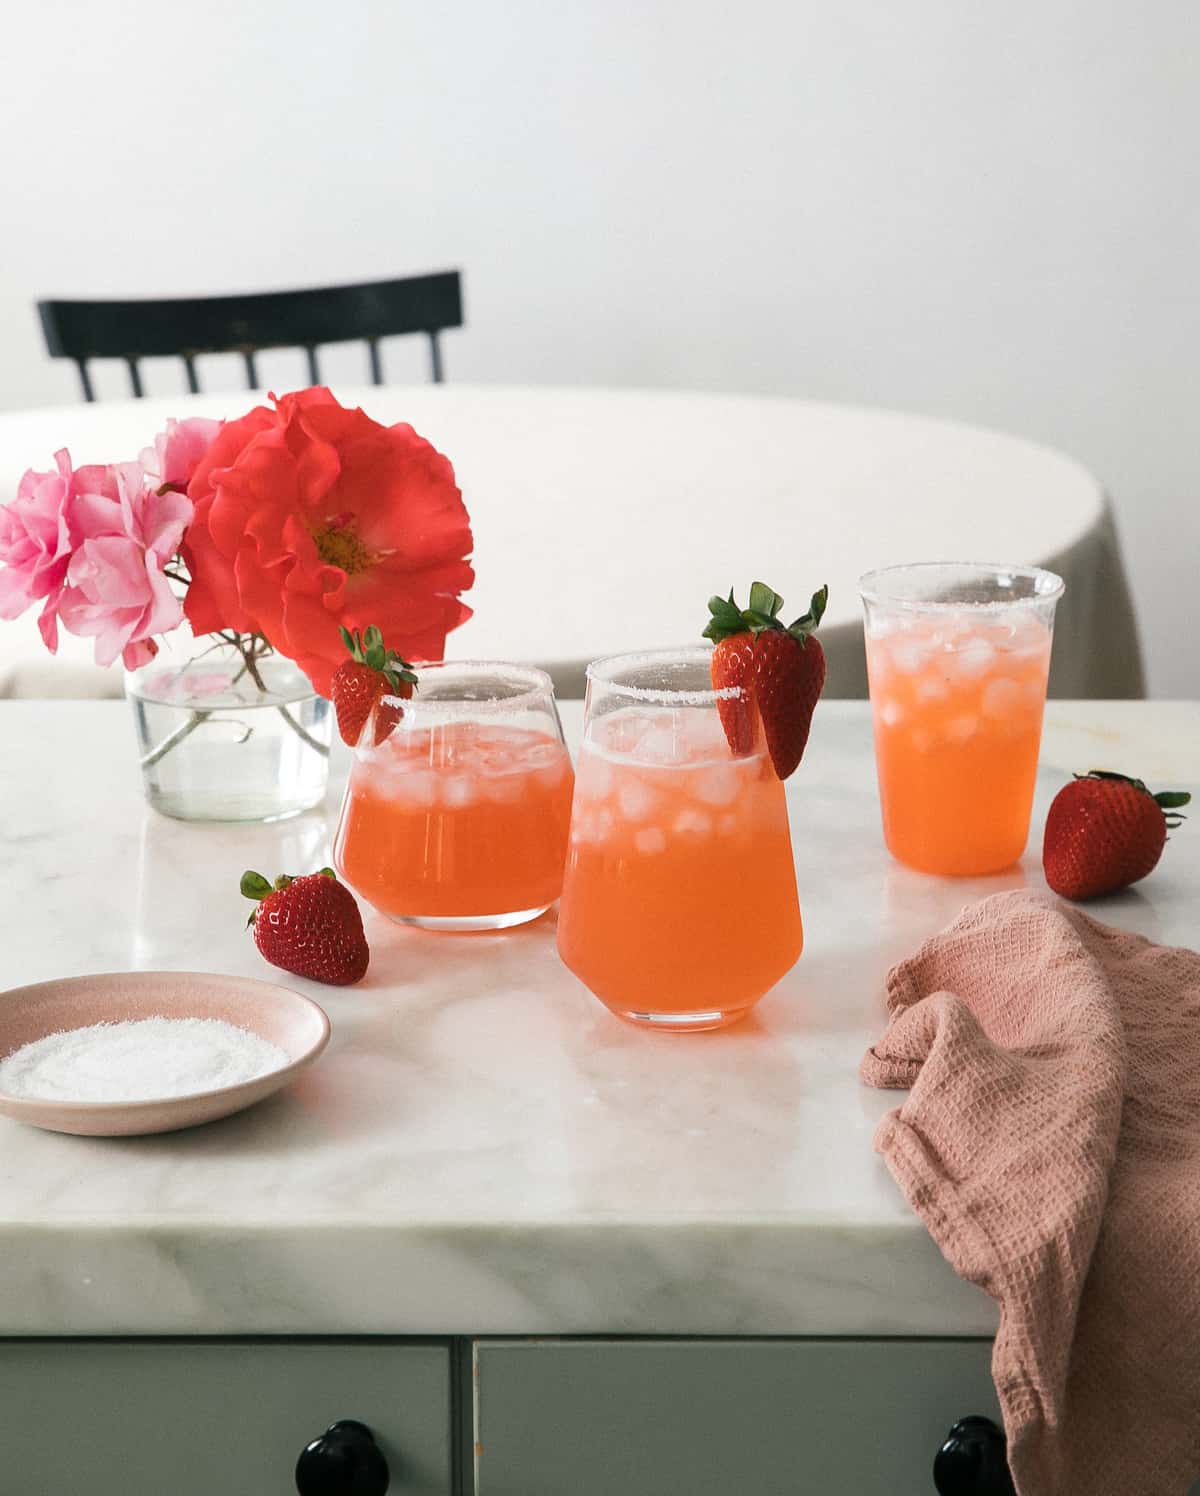 Glasses of strawberry margaritas with strawberries and flowers.